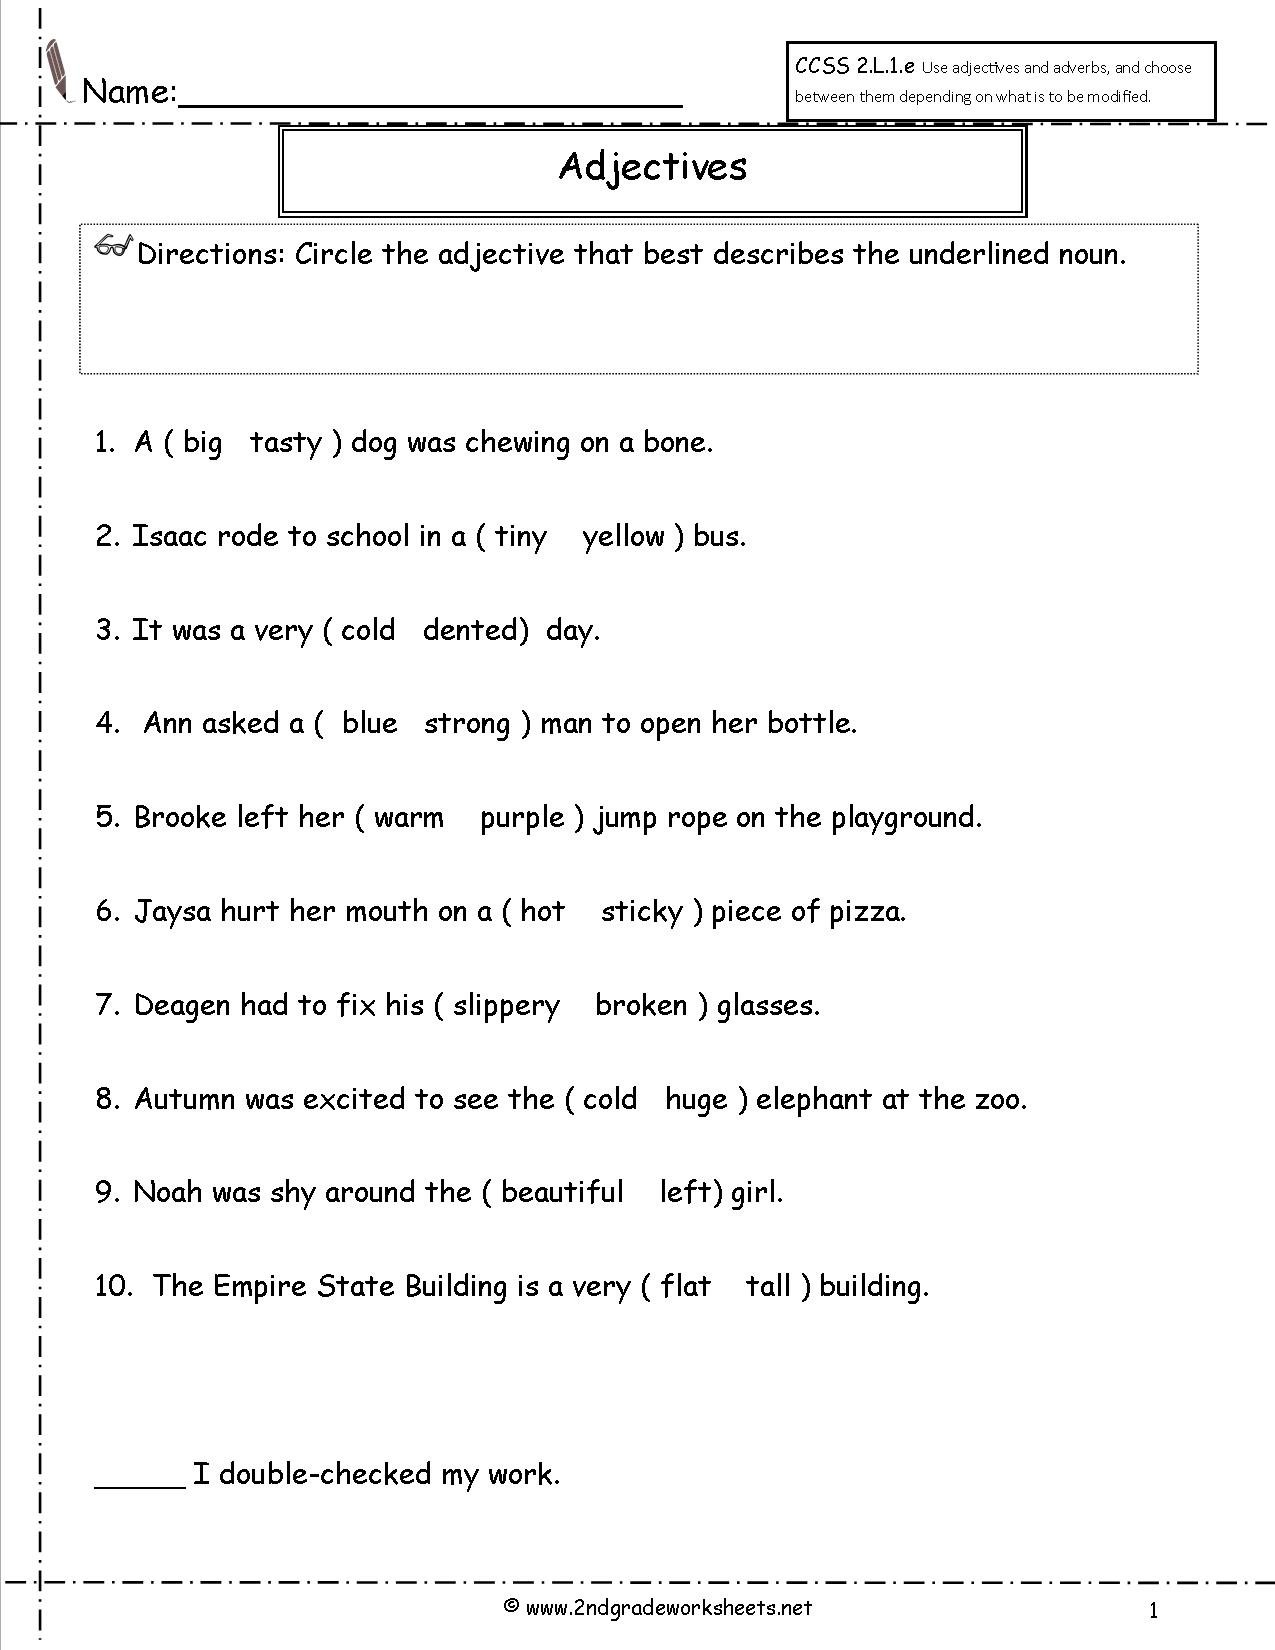 Free Using Adjectives And Adverbs Worksheets In Adjectives Worksheets For Grade 4